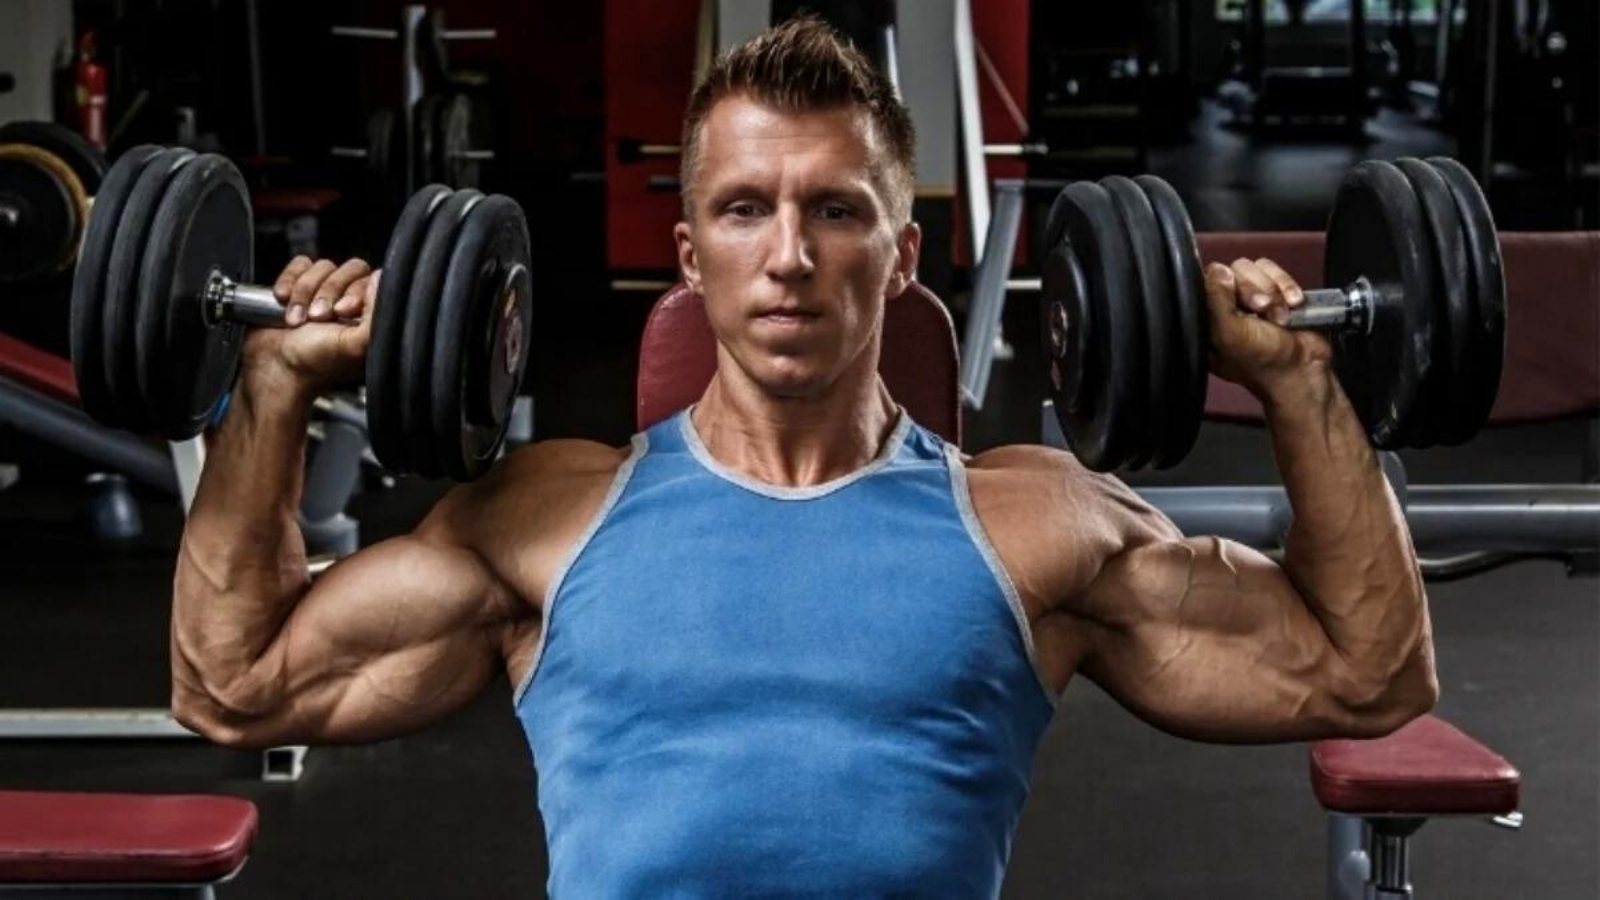 https://barbend.com/wp-content/uploads/2021/01/Barbend-Featured-Image-1600x900-The-Ultimate-10-Week-Powerbuilding-Workout-Routine-for-Mass-and-Strength.jpg